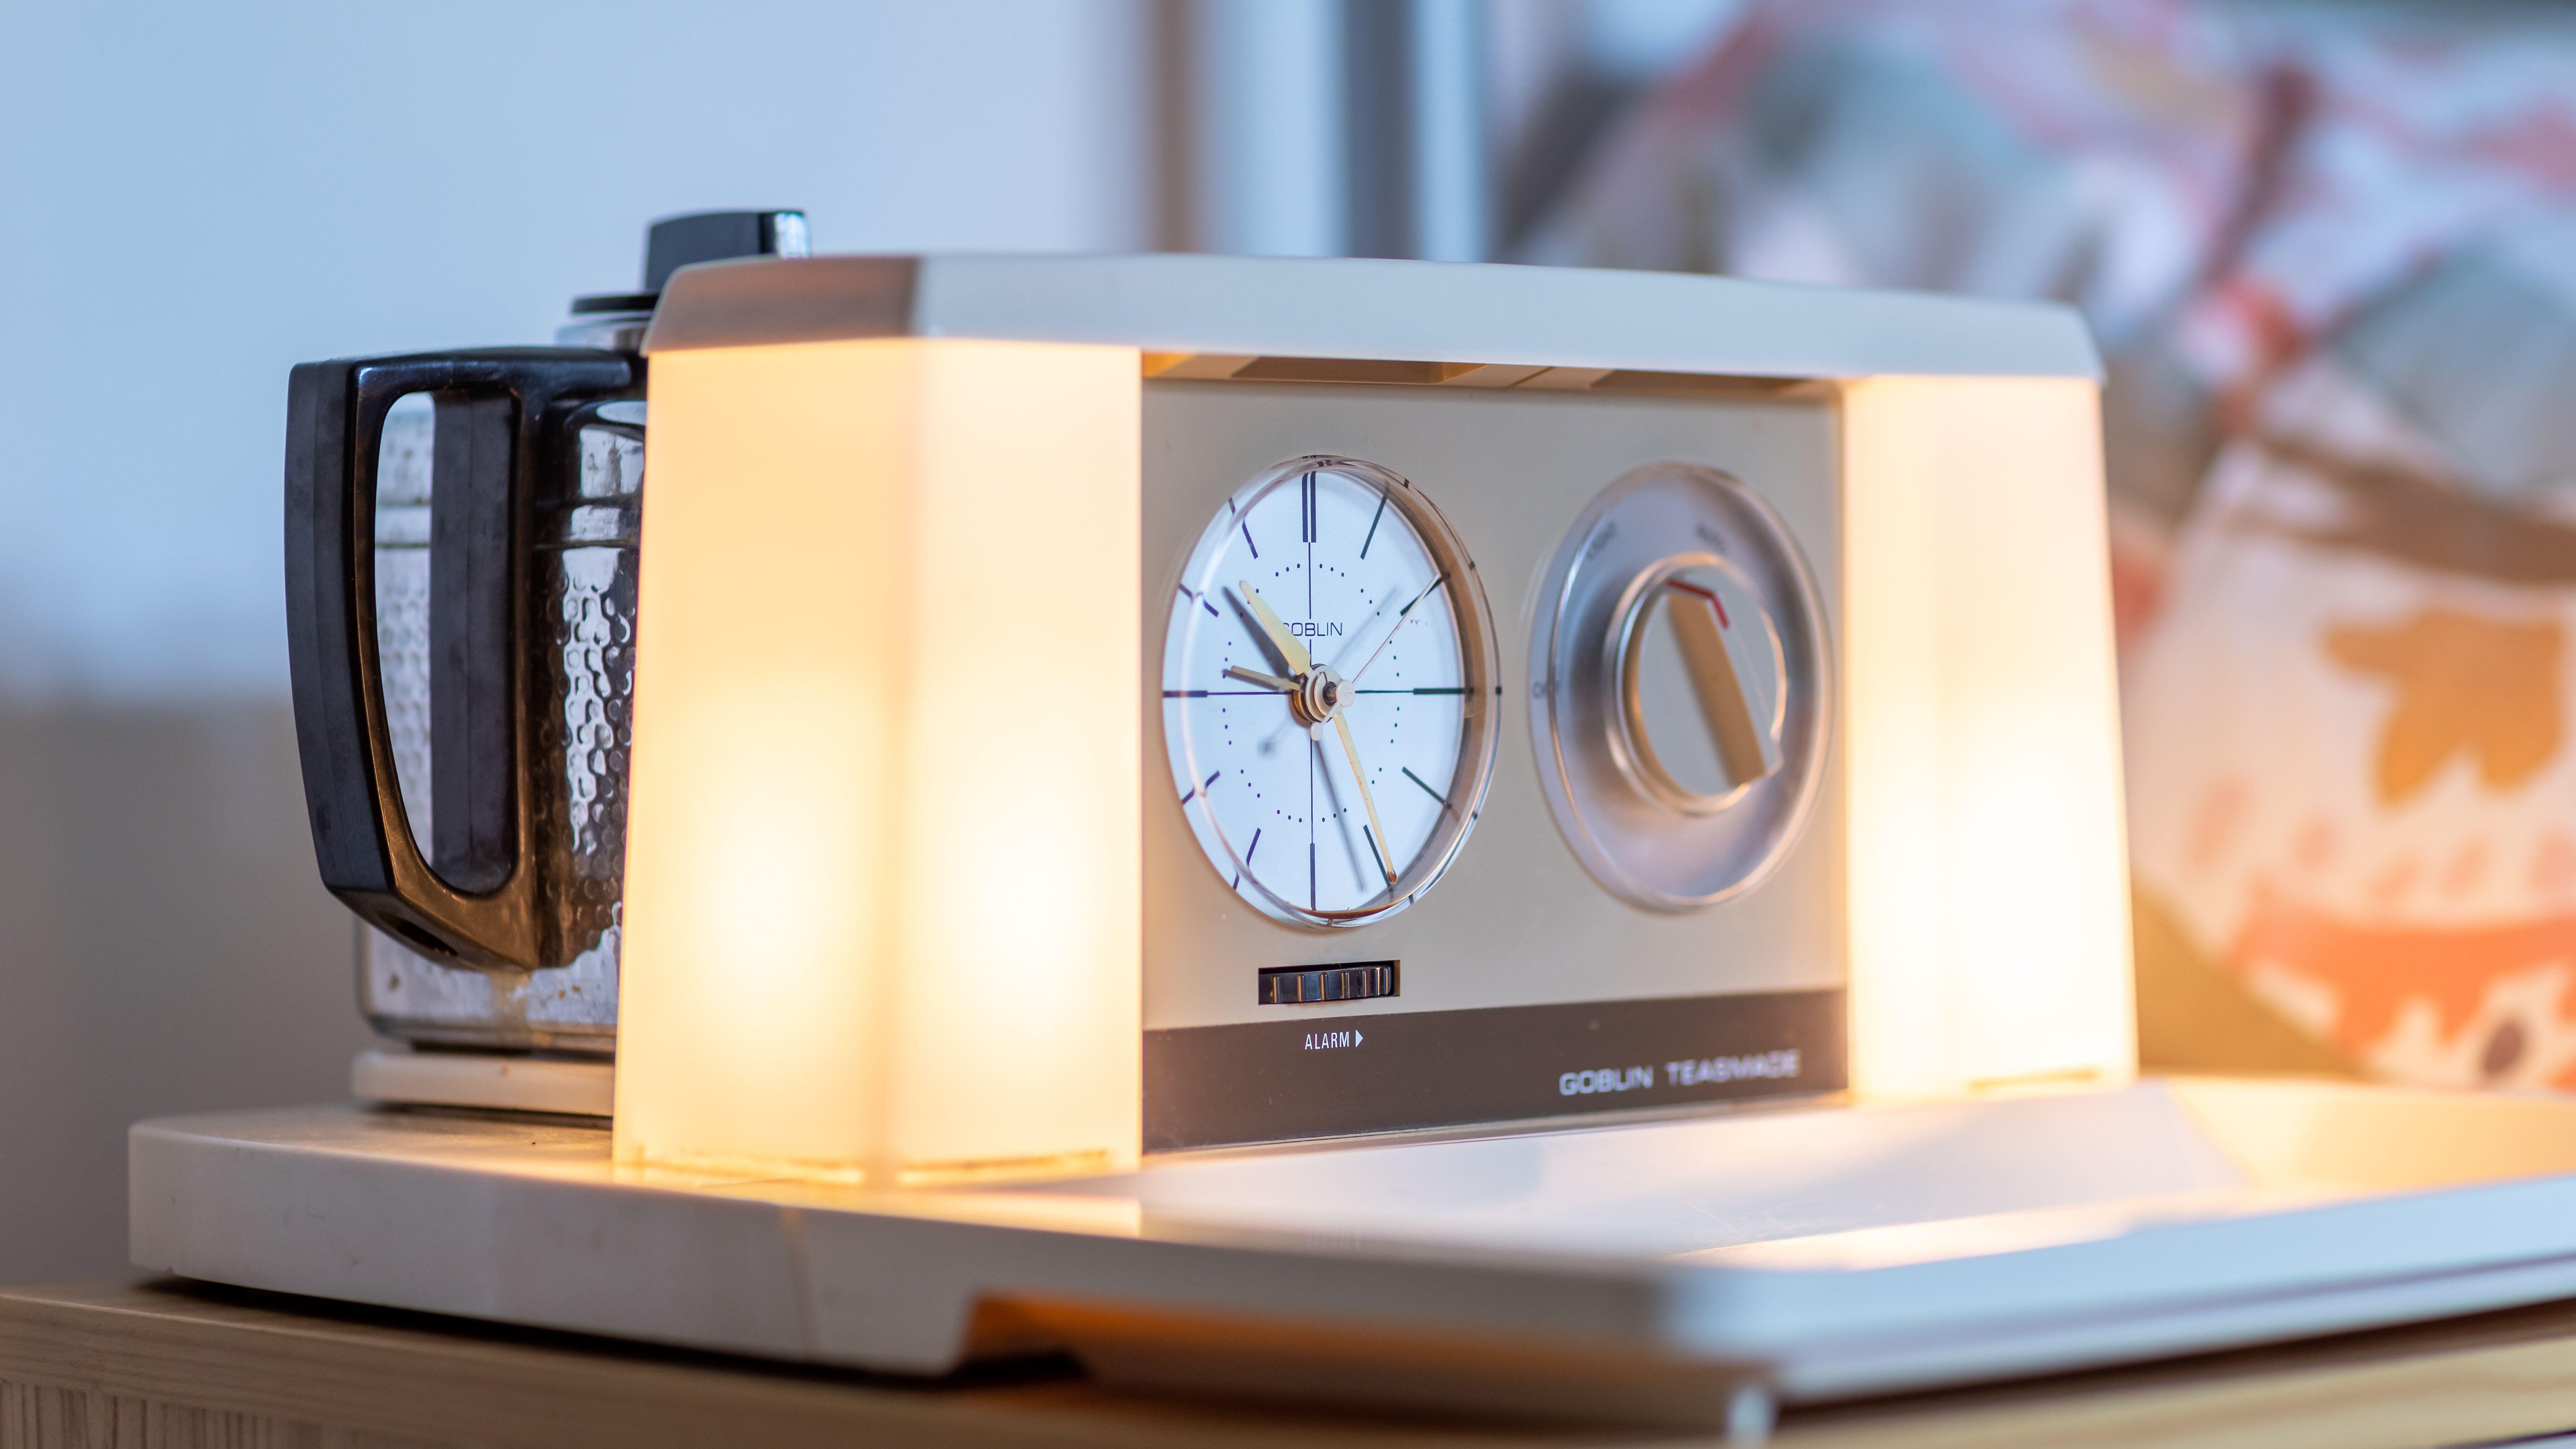 A teasmade bedside appliance with the lights switched on.